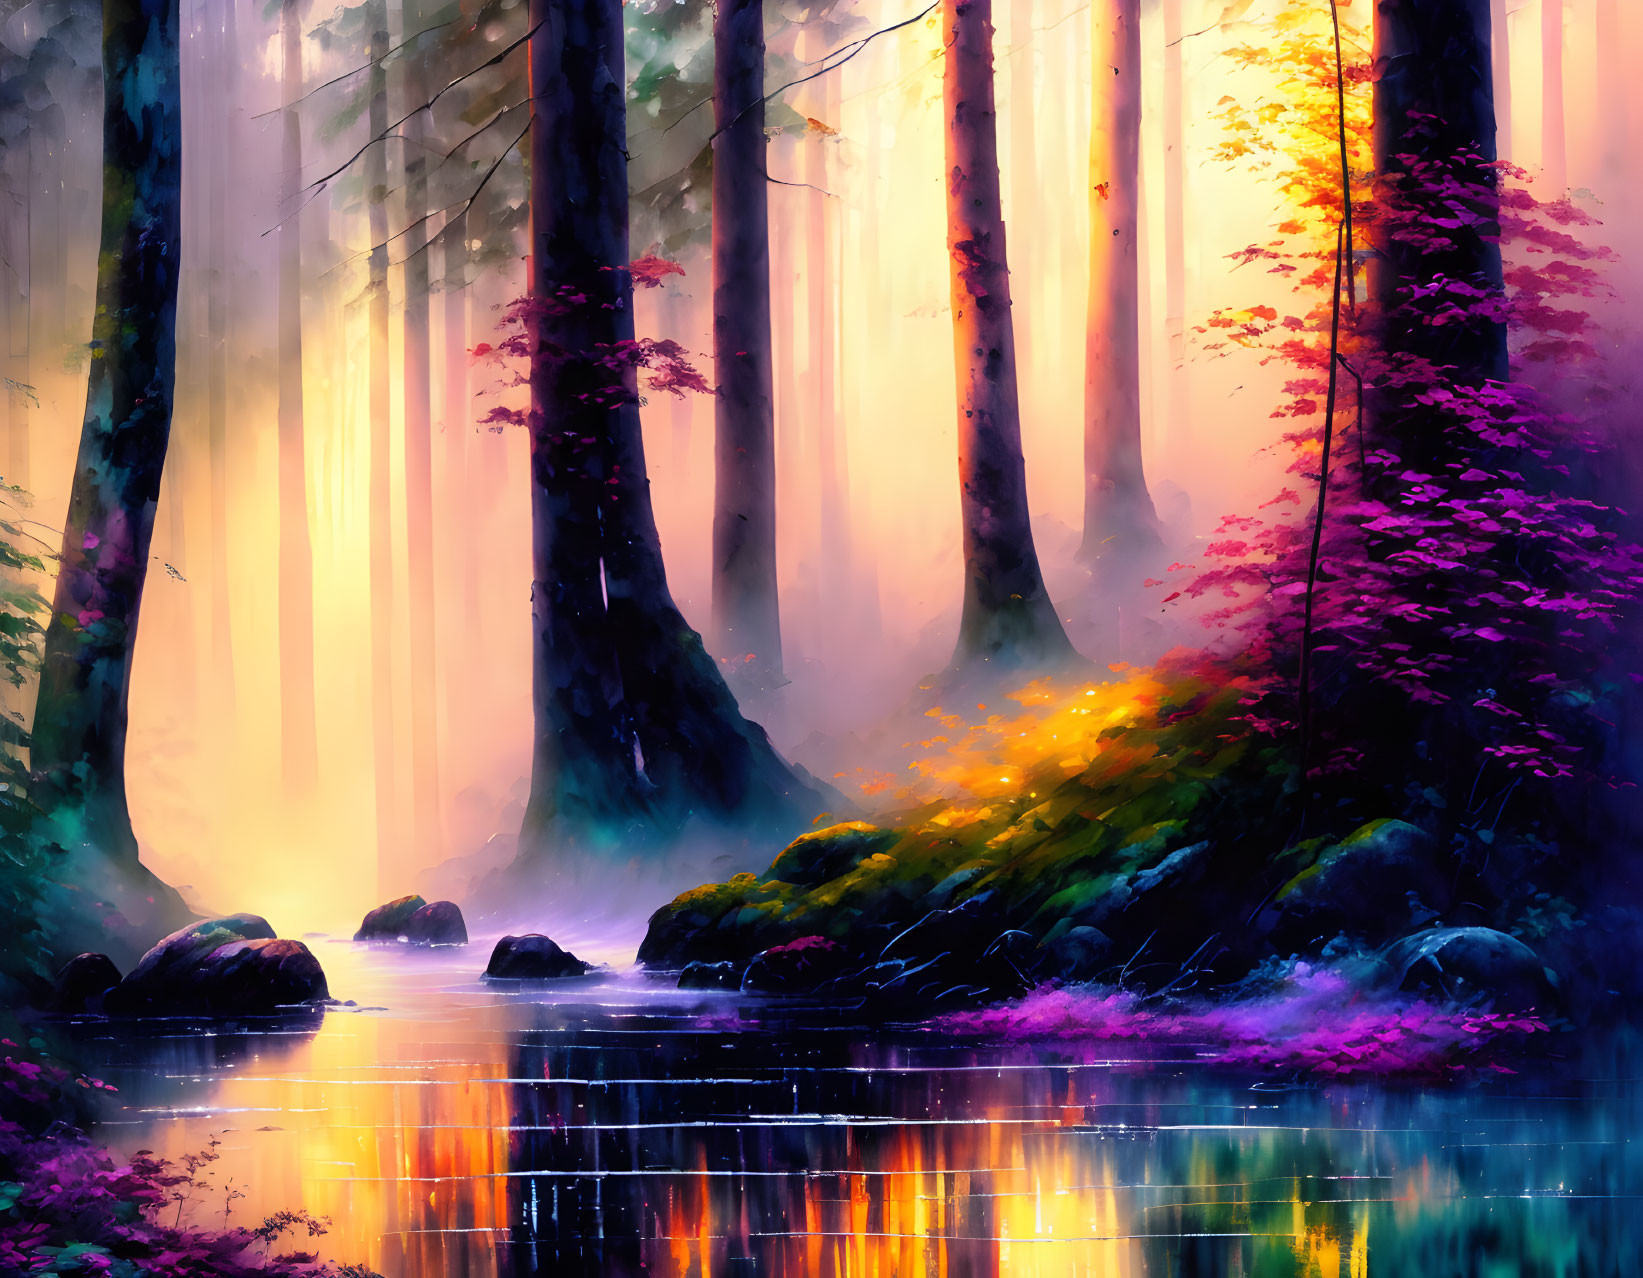 Misty forest scene with sunlight, river, colorful foliage